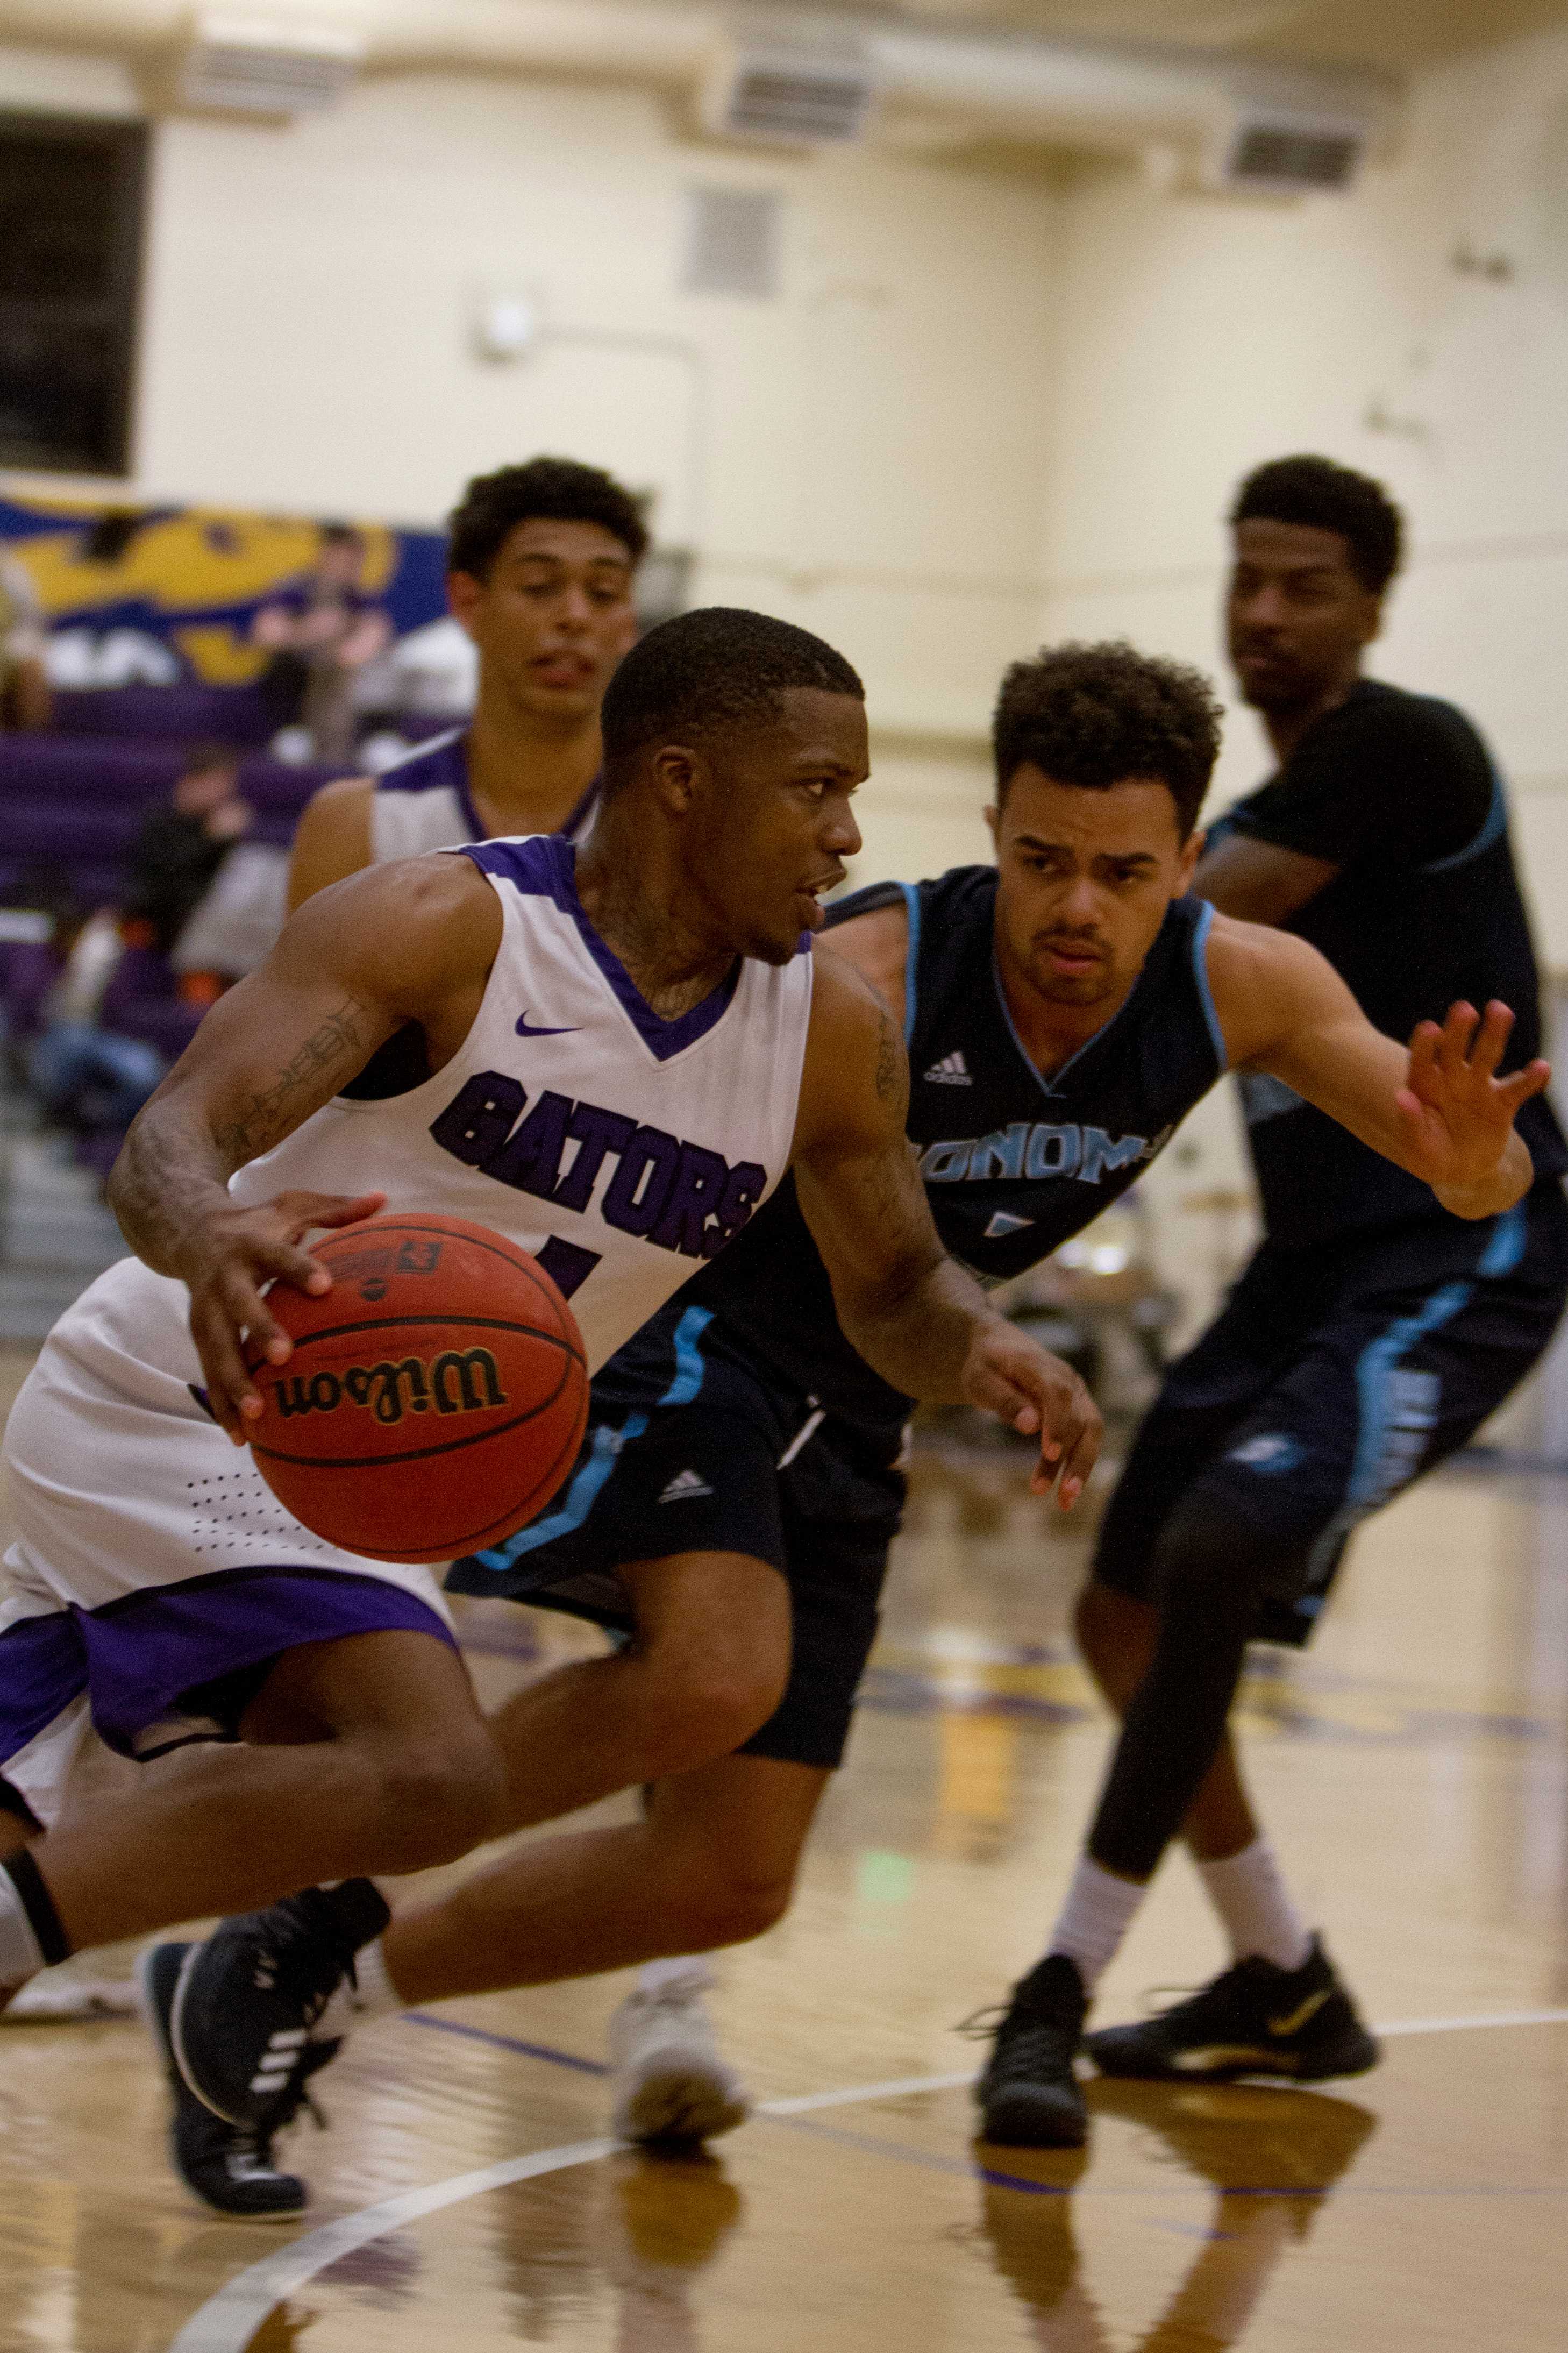 SF States Warren Jackson (1) tries to get past Sonoma States Brandon Tillis (2) to score during the game at SF State on Saturday, Feb. 10, 2018. (Joey Vangsness/Golden Gate Xpress)